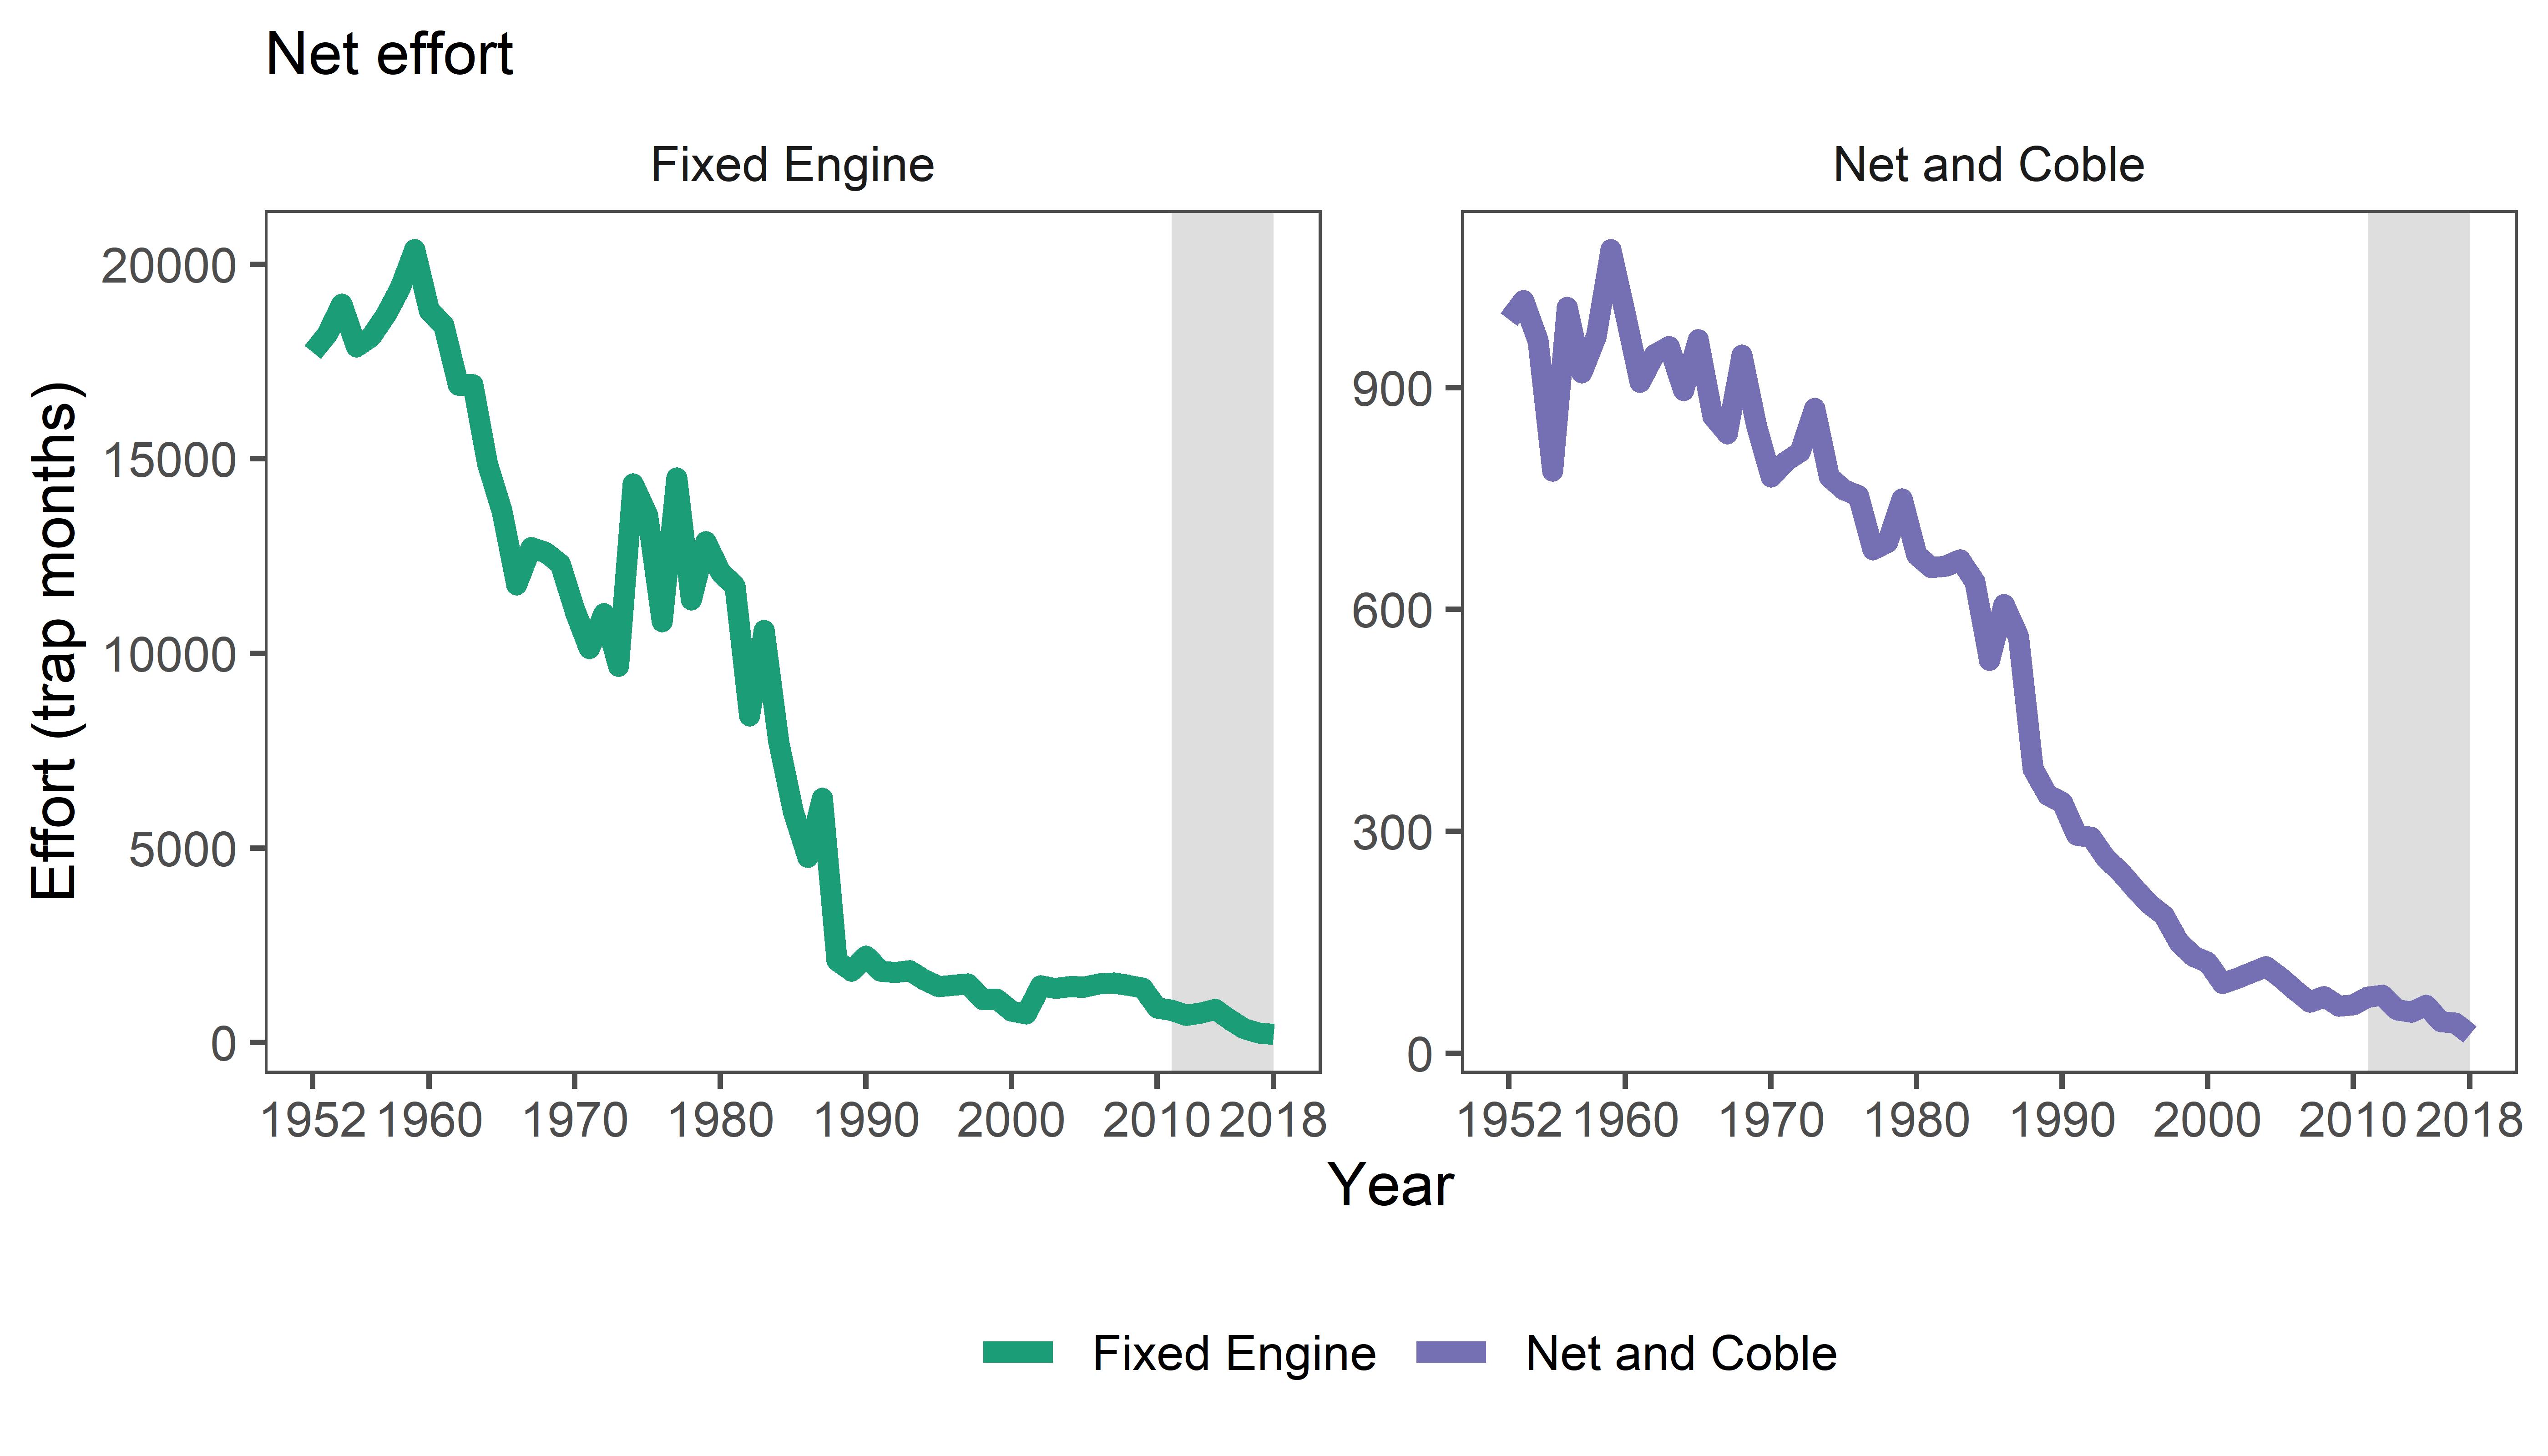 Figure a: Effort data for the fixed engine and net and coble fisheries in Scotland 1952 to 2018. Source: Marine Scotland